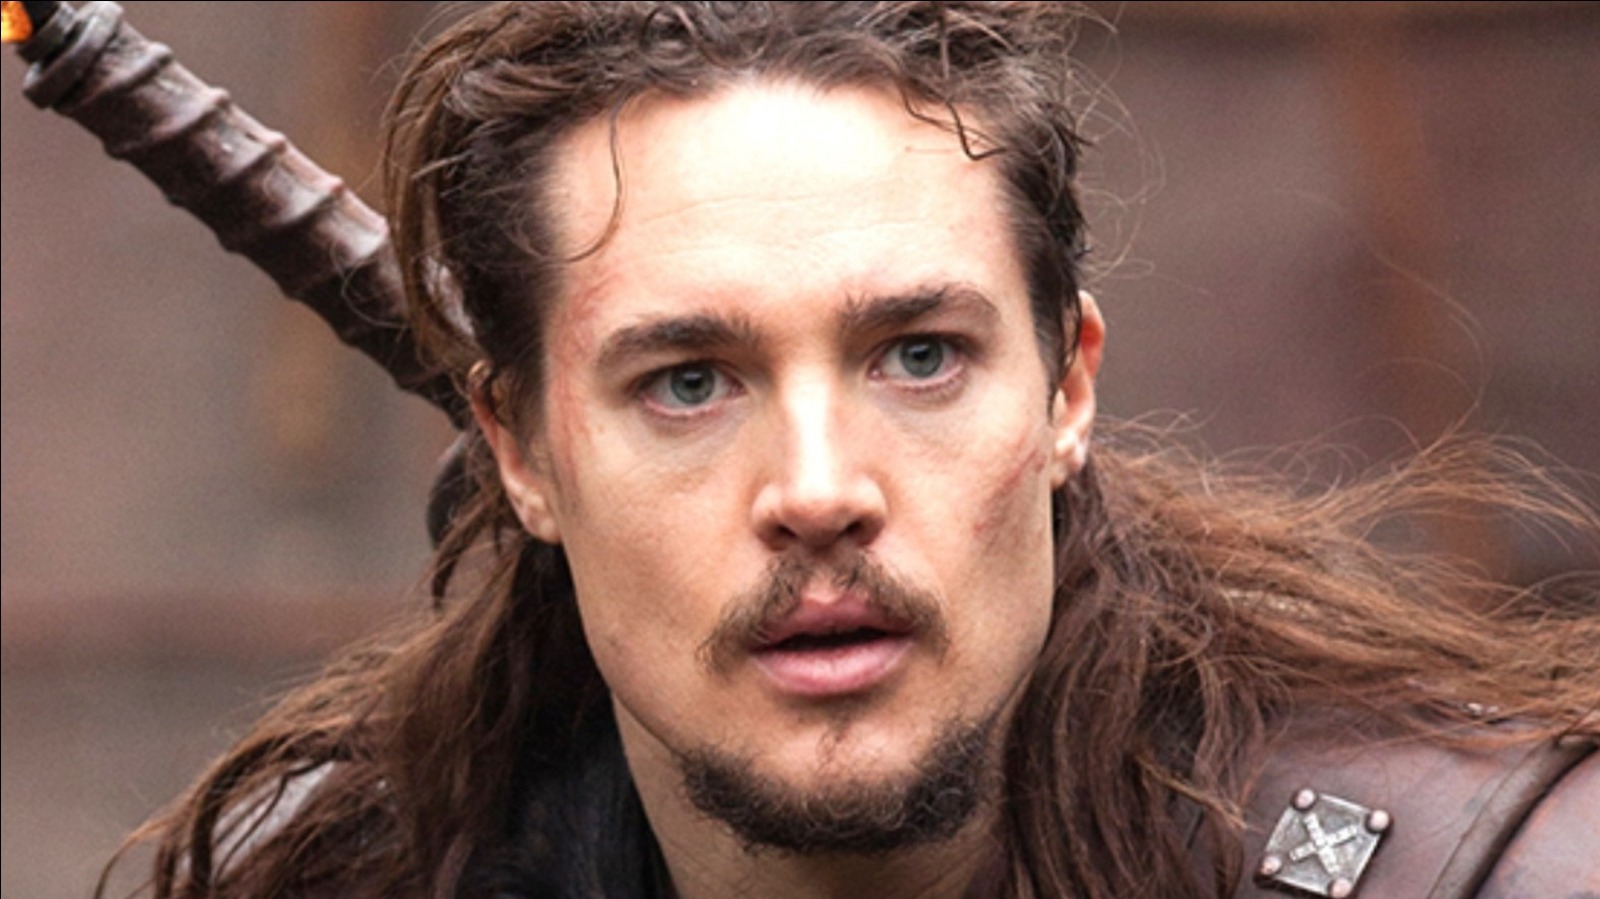 The Real Uhtred of Bebbanburg AKA Uhtred the Bold 